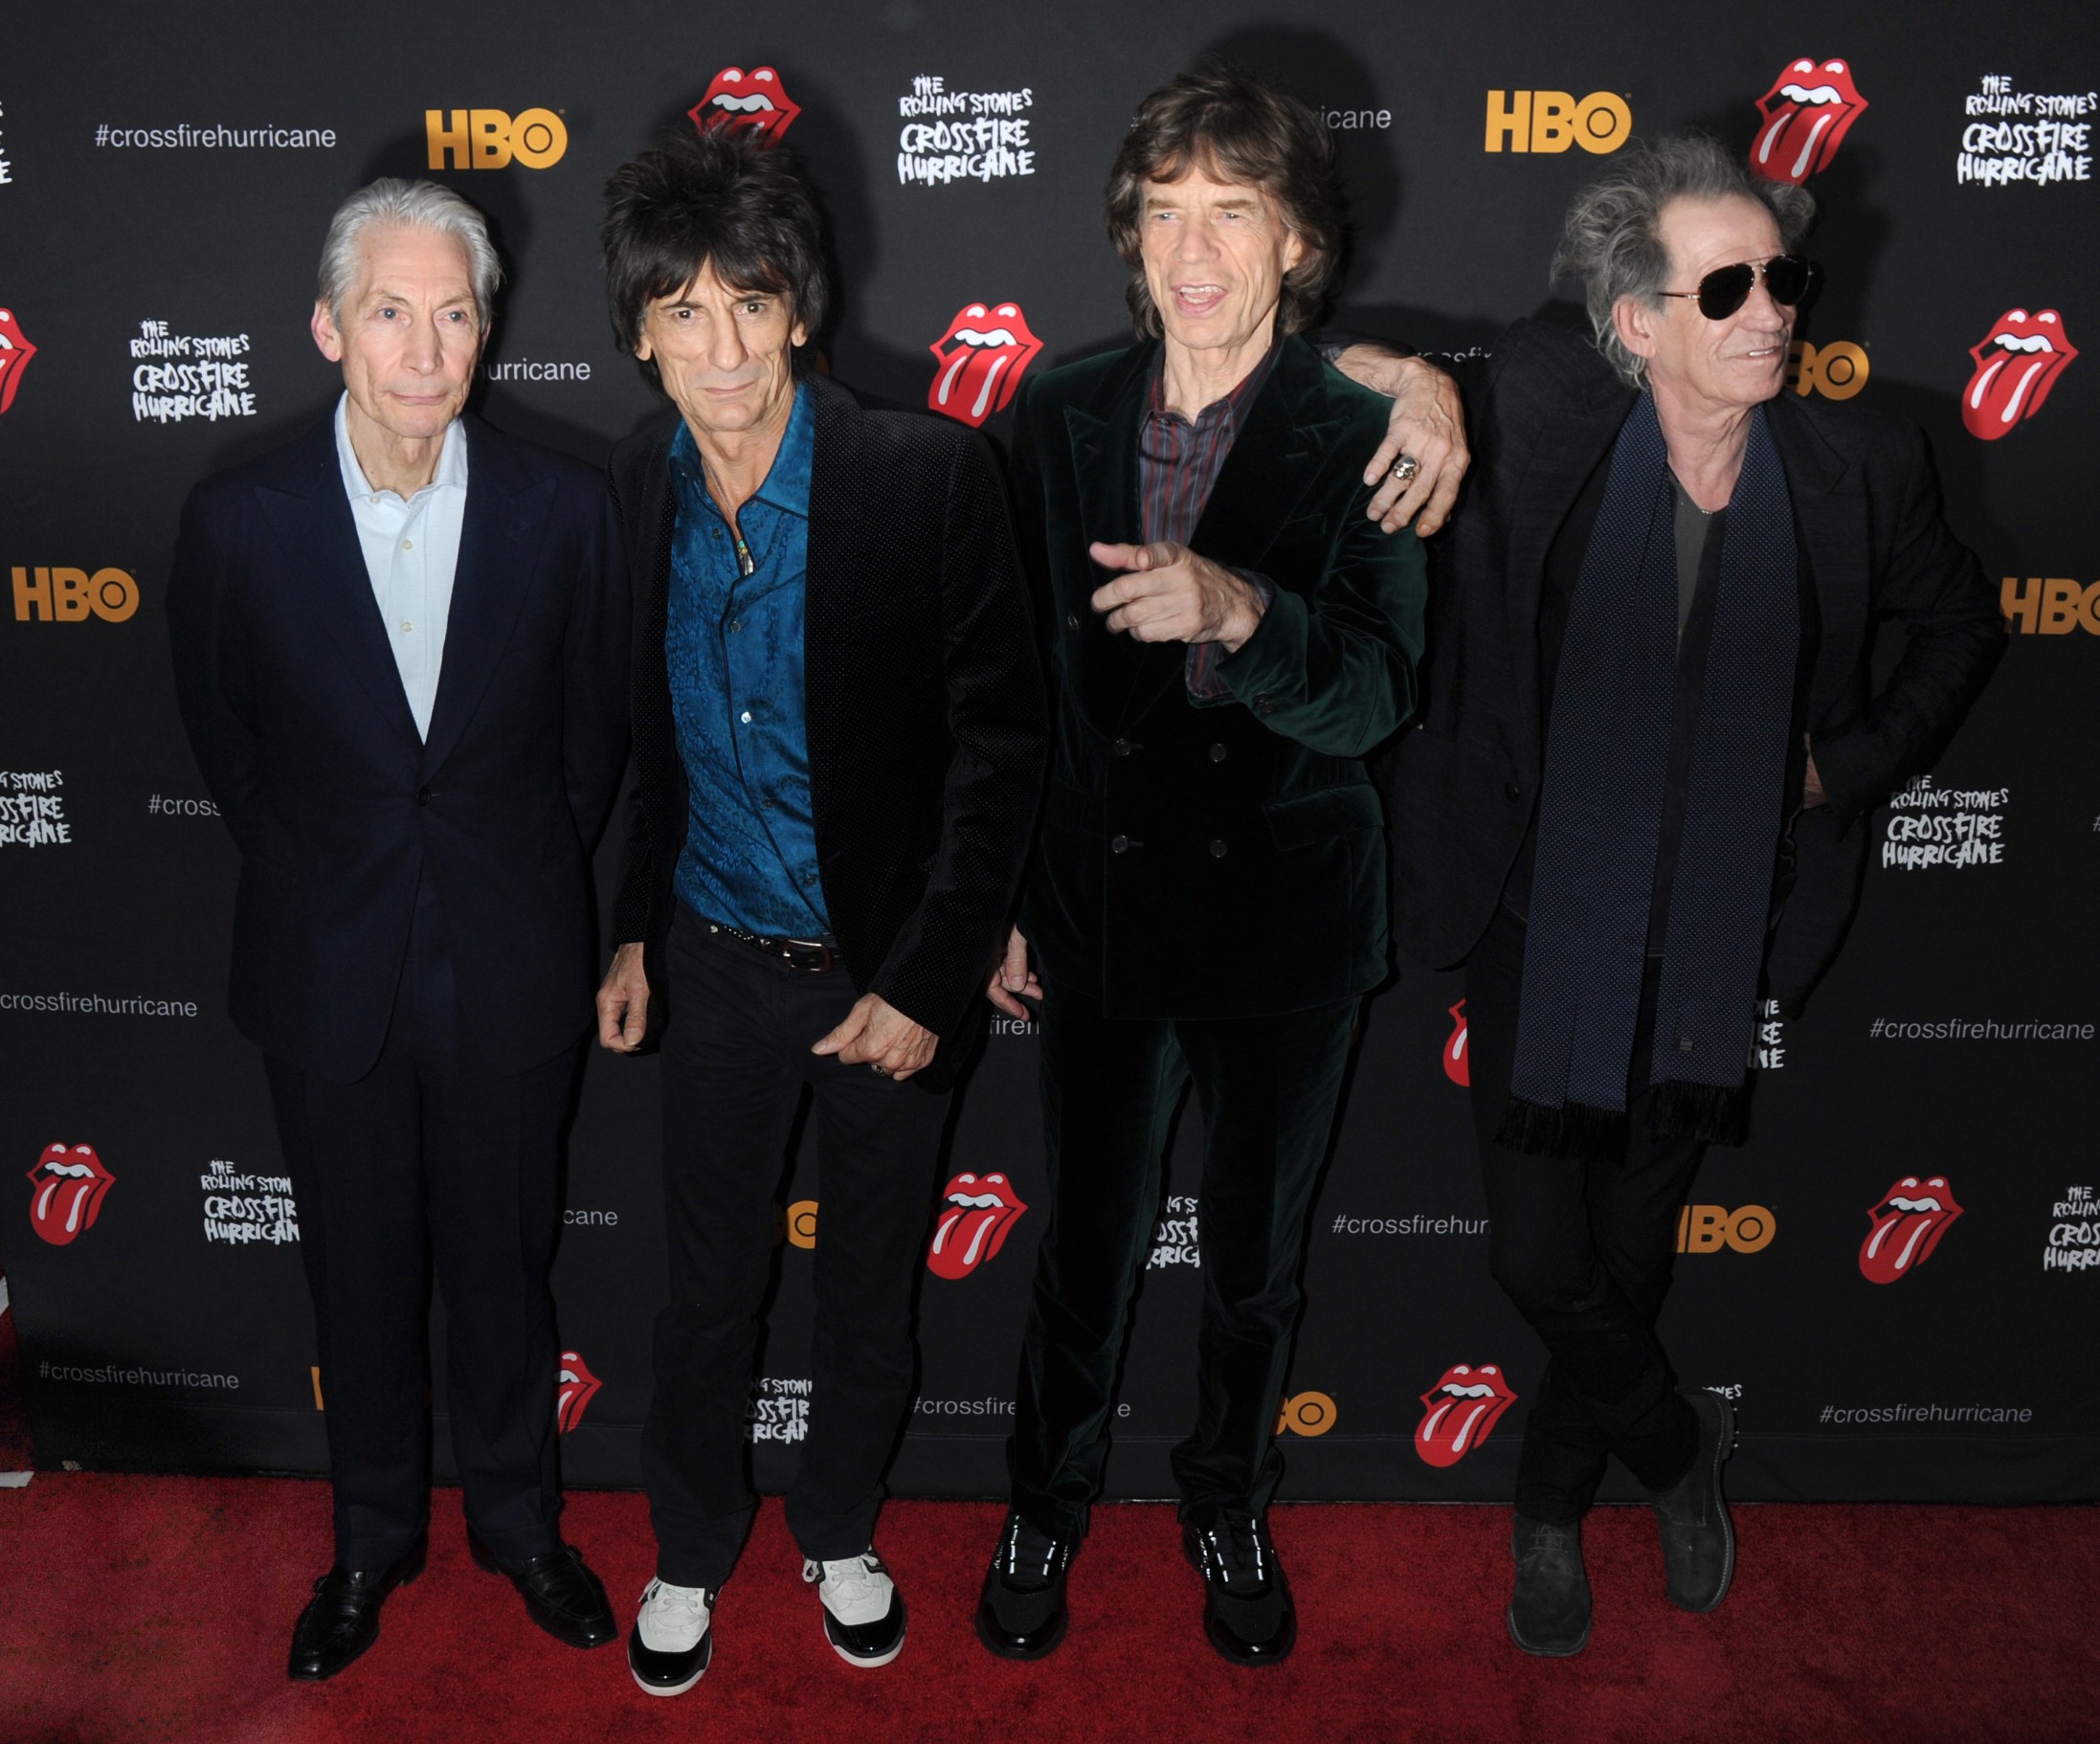 [NO Germany, Austria] New York, NY - Charlie Watts, Keith Richards, Ronnie Wood, and Mick Jagger of The Rolling Stones hit the red carpet for their premiere of the documentary 